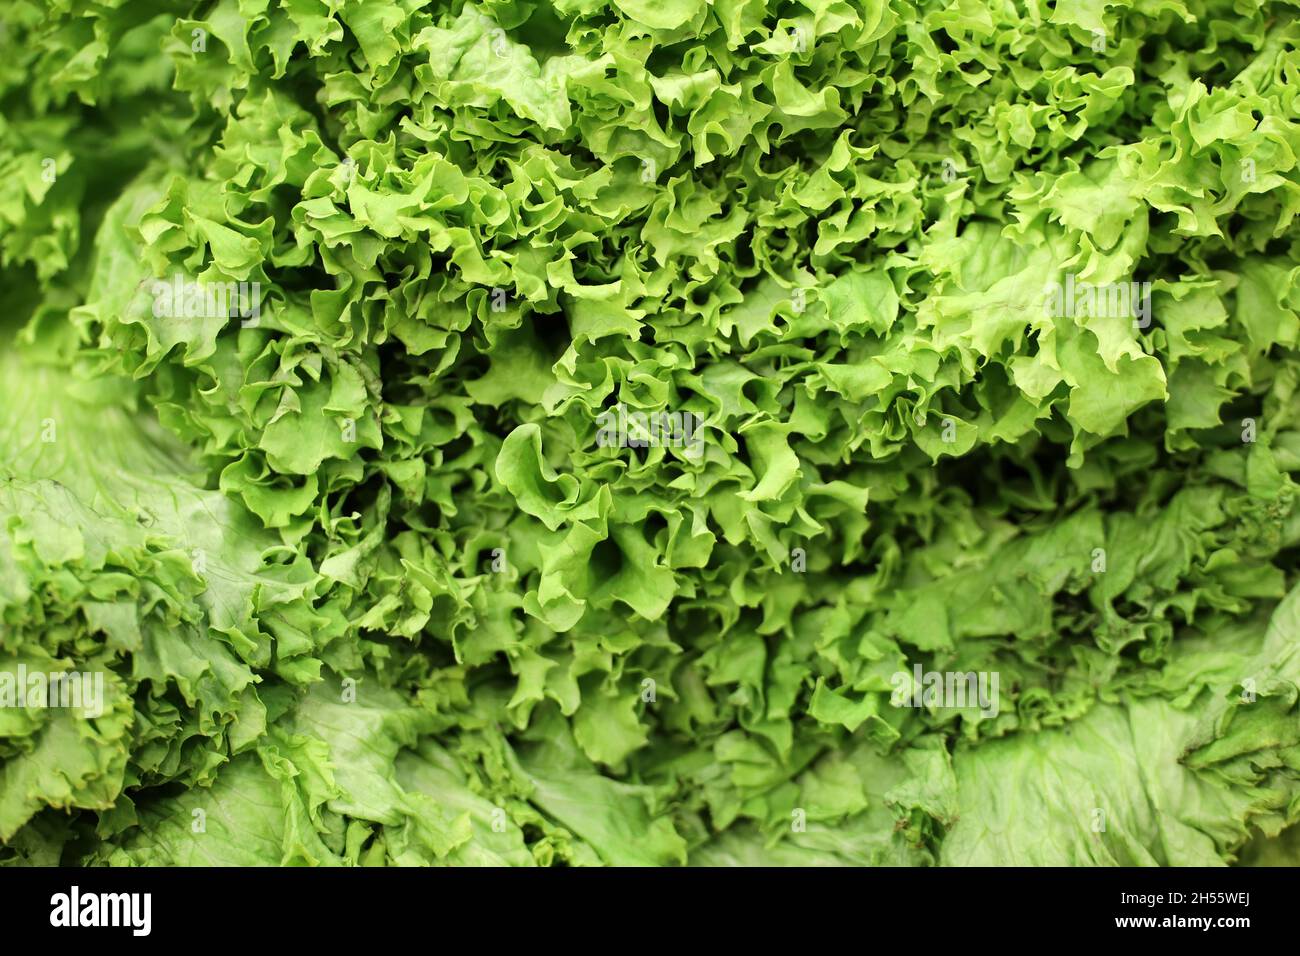 Green lettuce leaves in supermarket, healthy diet concept Stock Photo